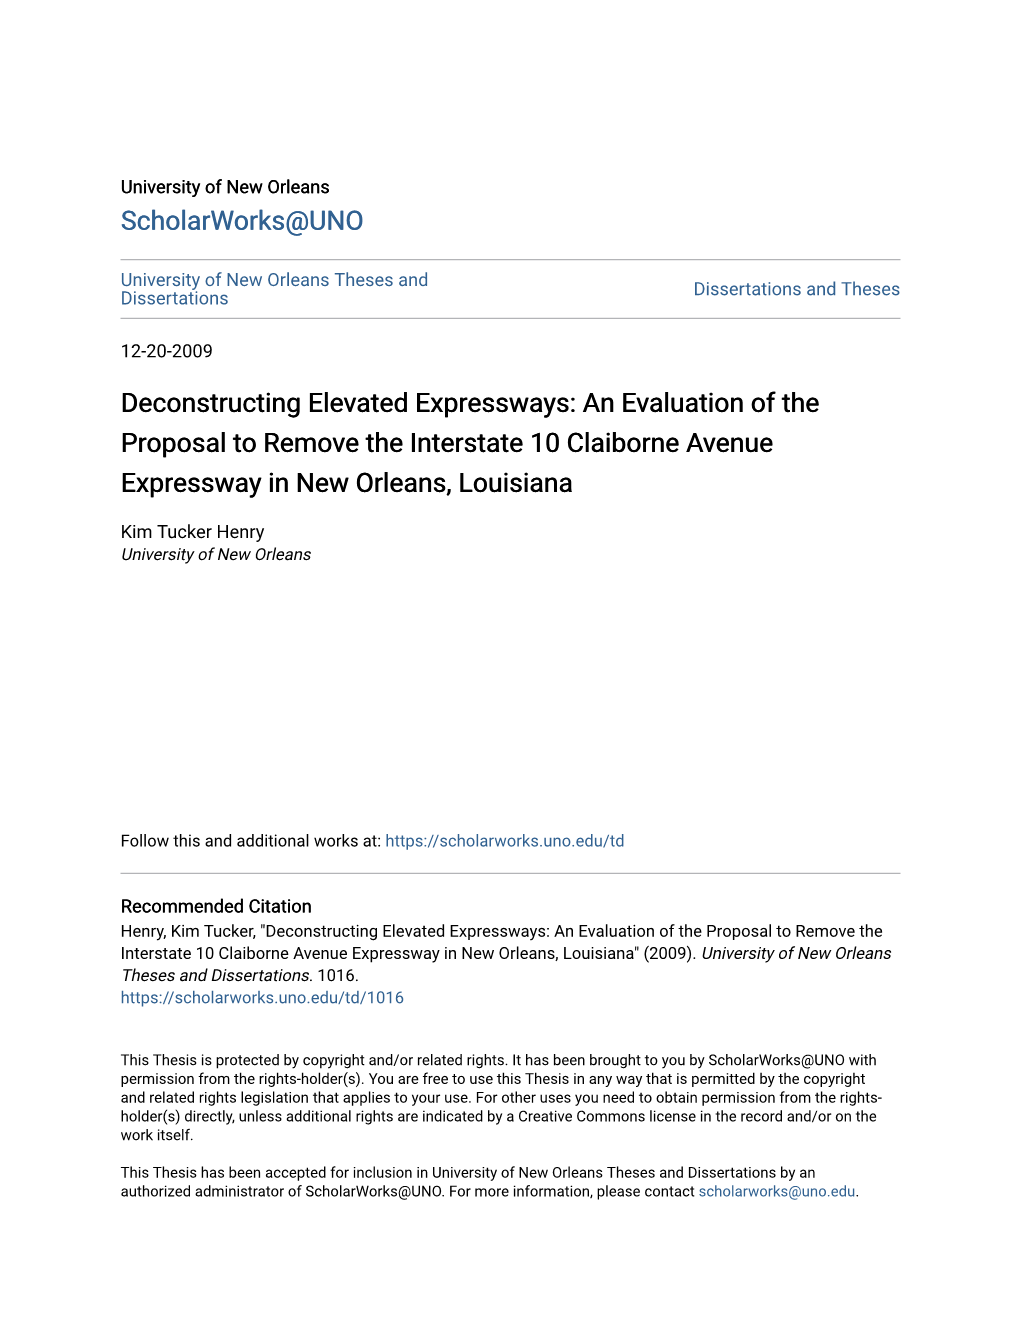 An Evaluation of the Proposal to Remove the Interstate 10 Claiborne Avenue Expressway in New Orleans, Louisiana